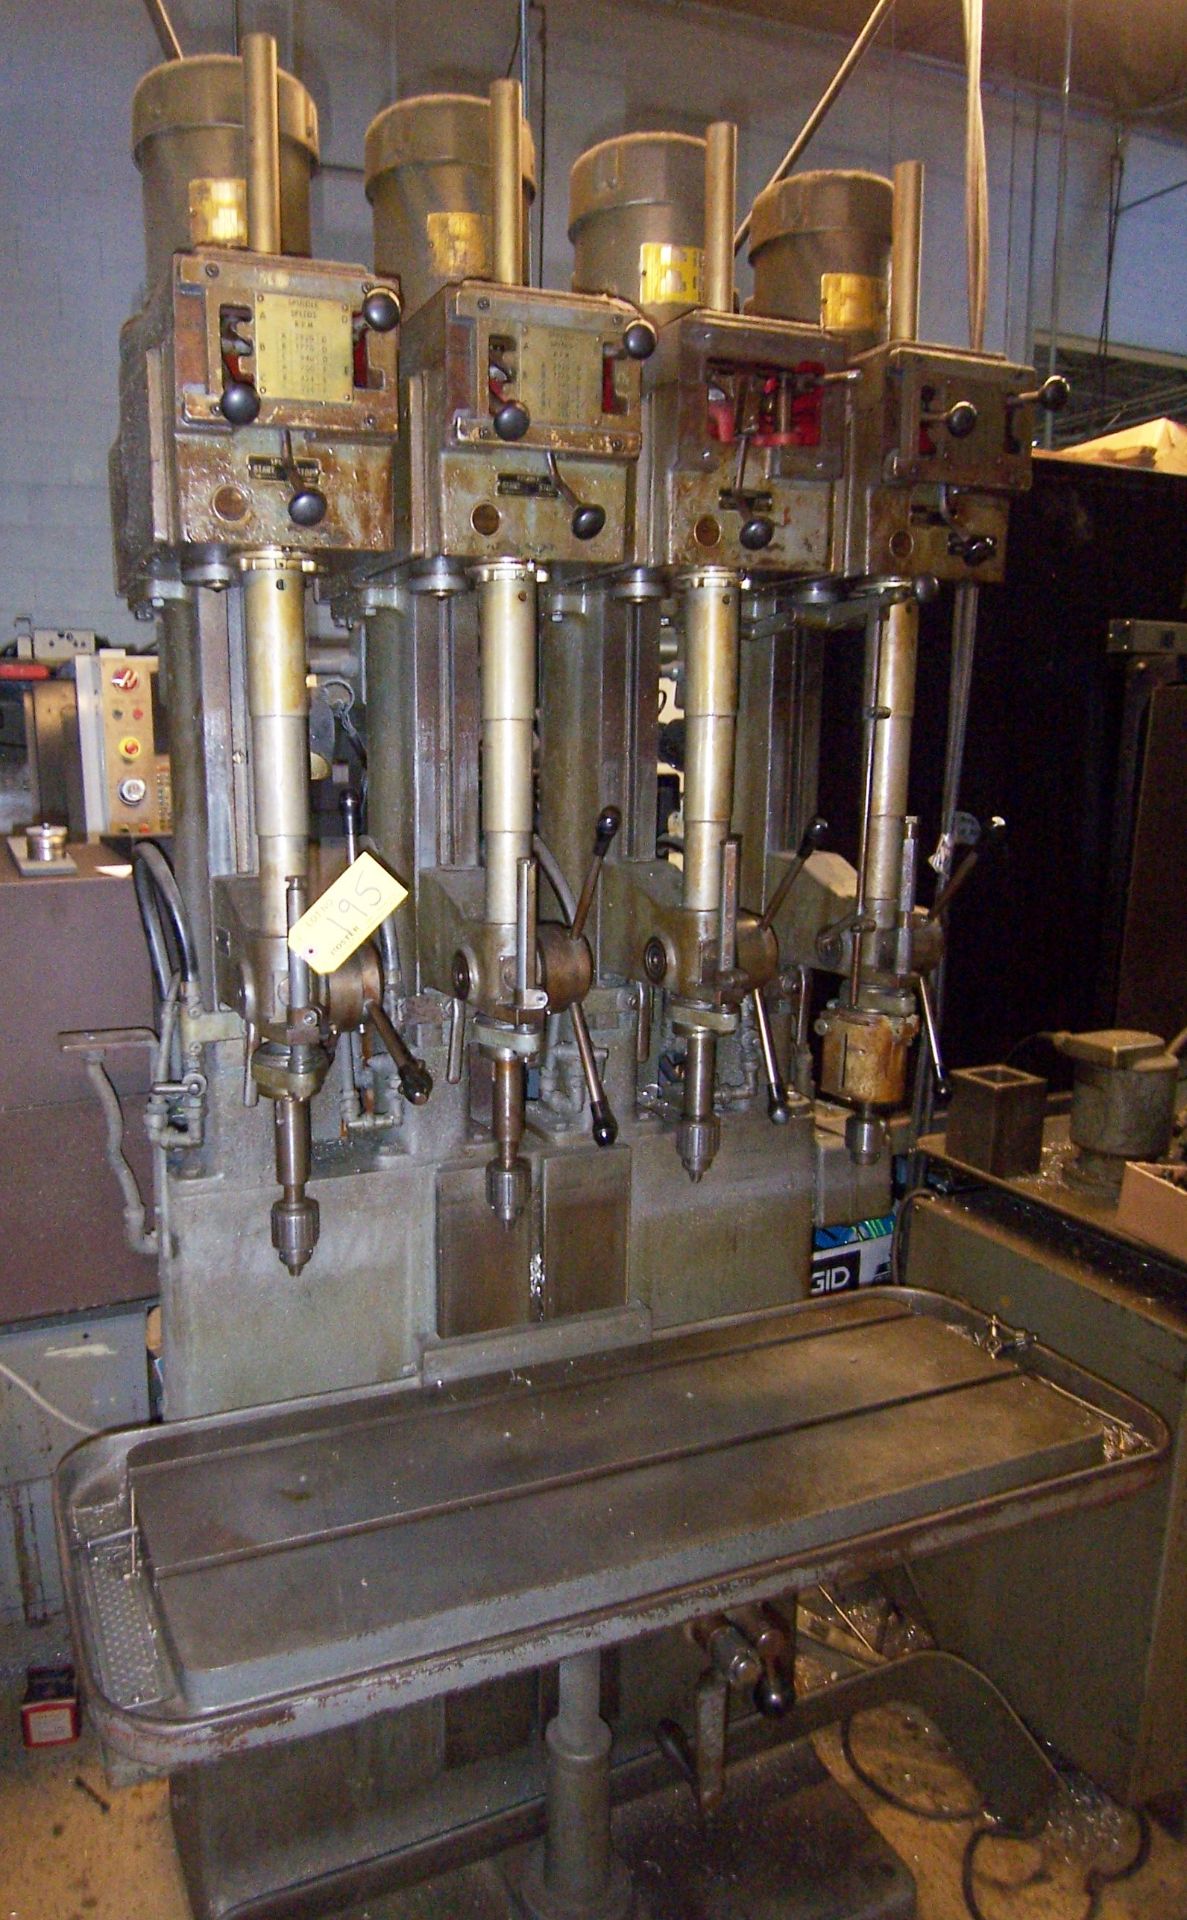 15" POLLARD 4-SPINDLE PRODUCTION DRILL, WITH 15" X 4" HAND CRANK TABLE, SPINDLE SPEEDS 226-2920 RPM